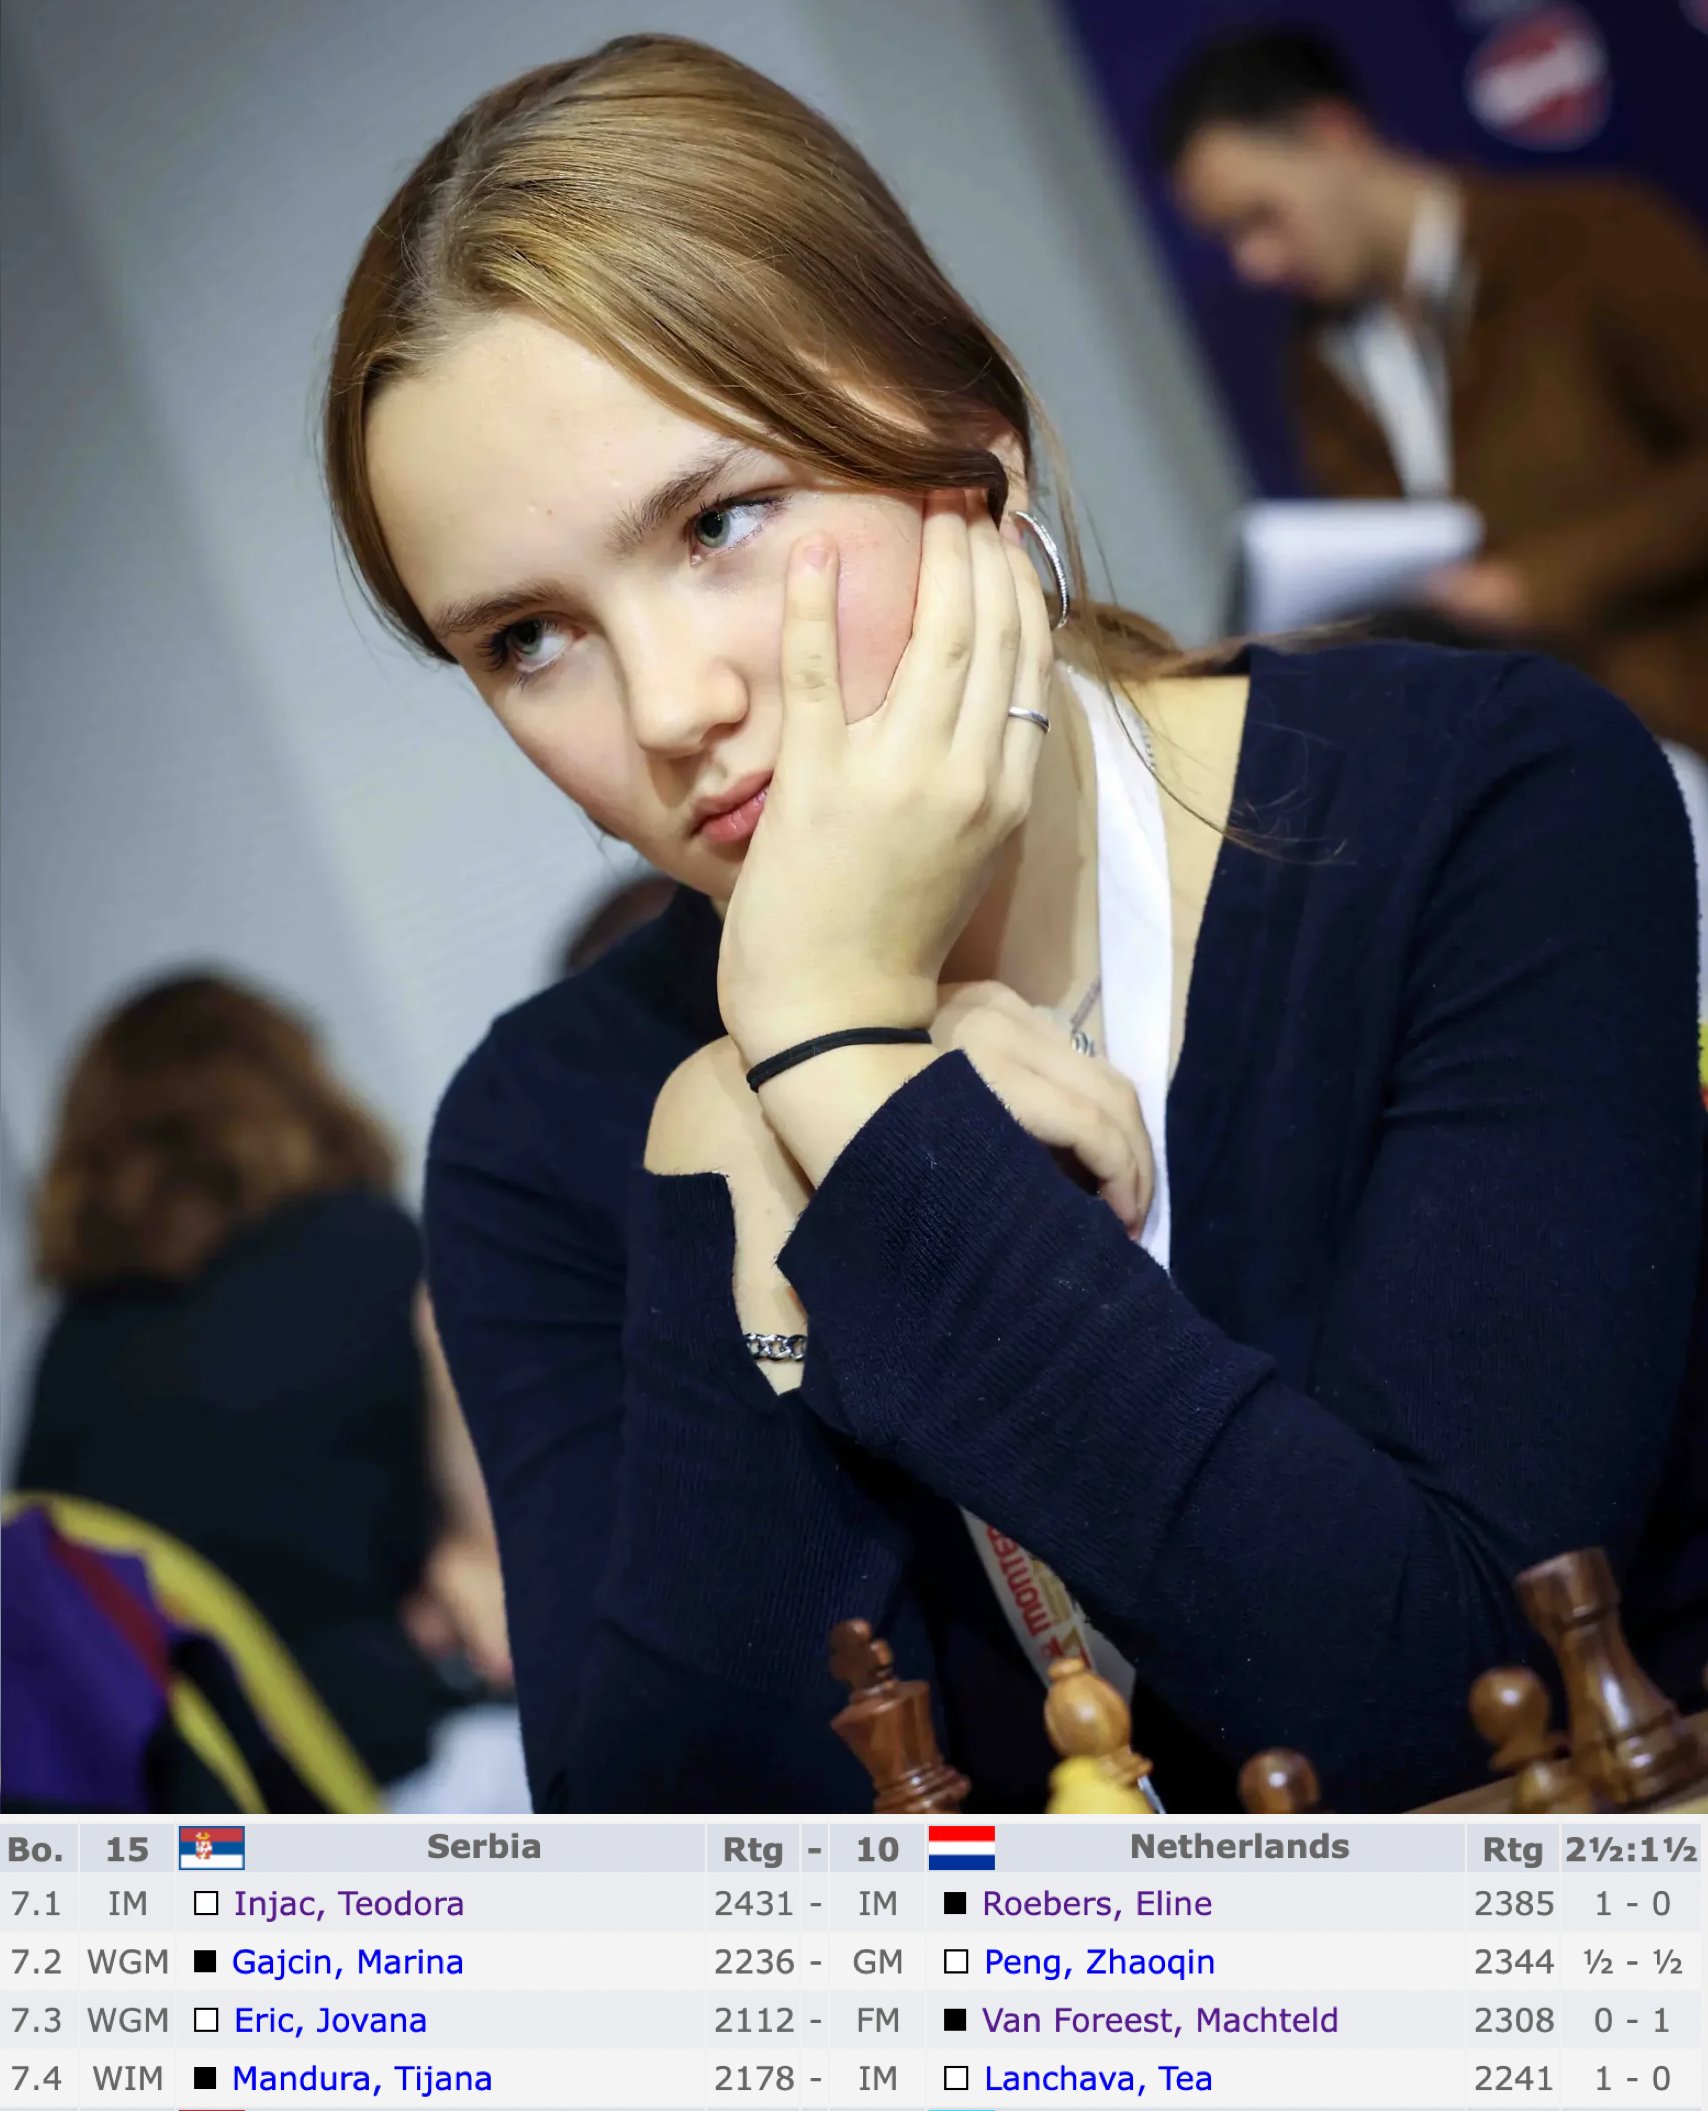 Women's Chess Coverage on X: Actually, they did put Teodora Injac